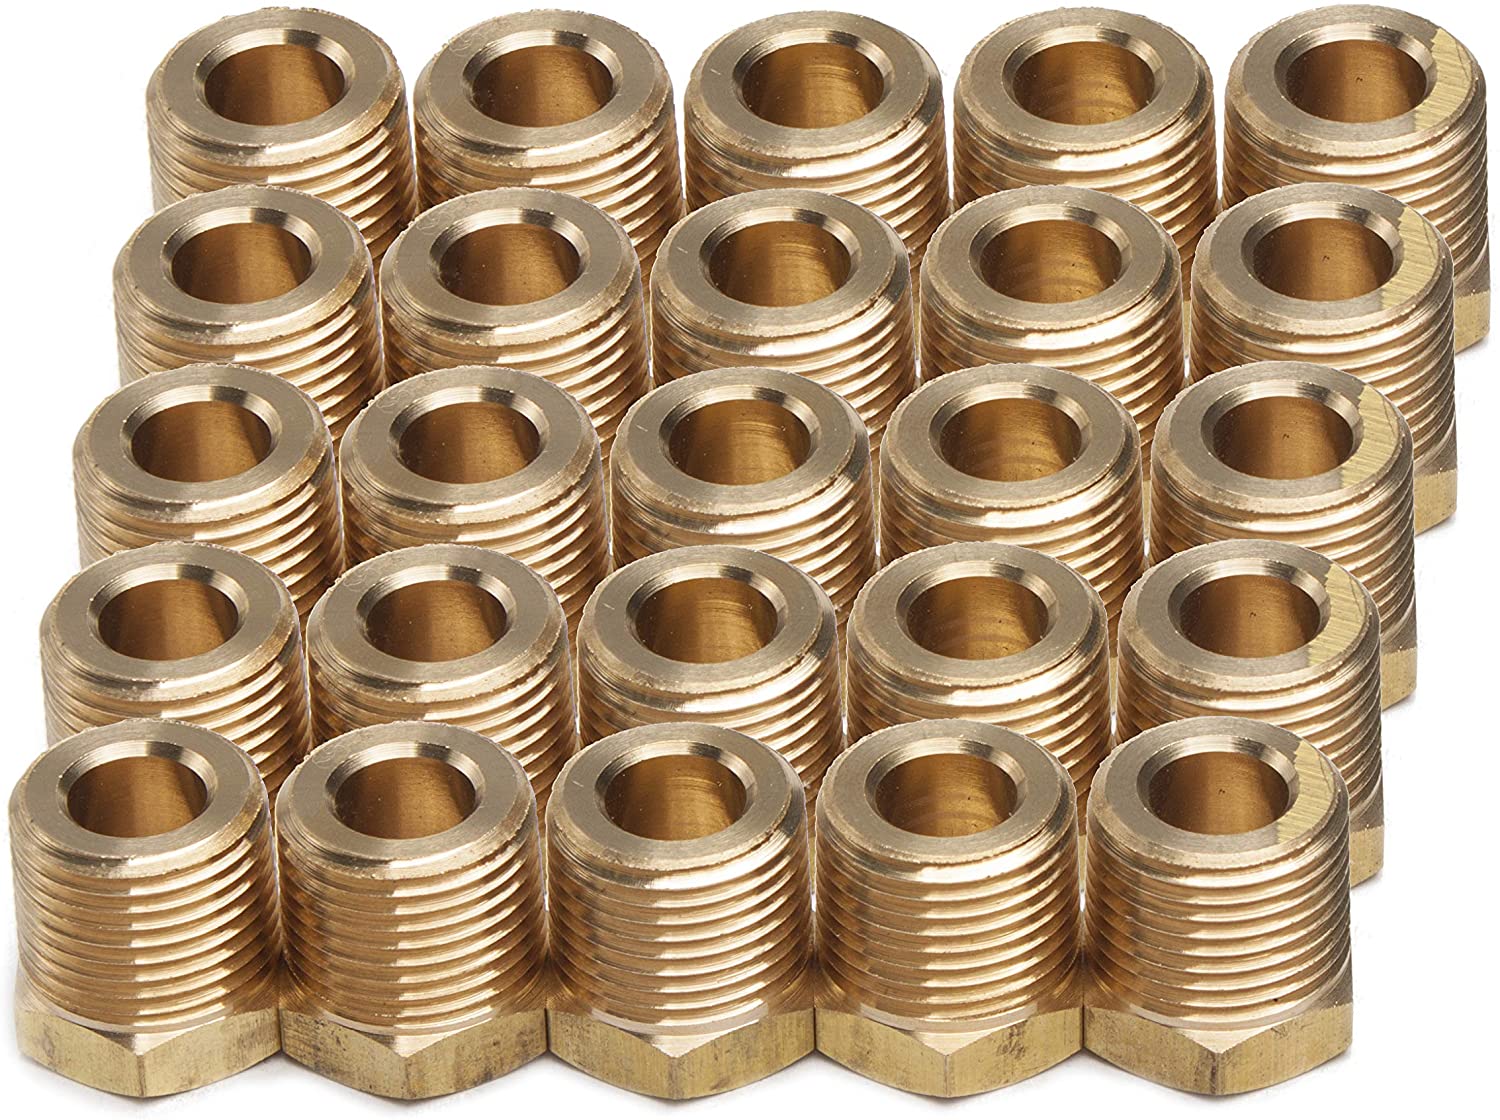 LTWFITTING Brass Pipe Hex Bushing Reducer Fittings 1/2-Inch Male BSPT x 1/8-Inch Female BSPP (Pack of 25)